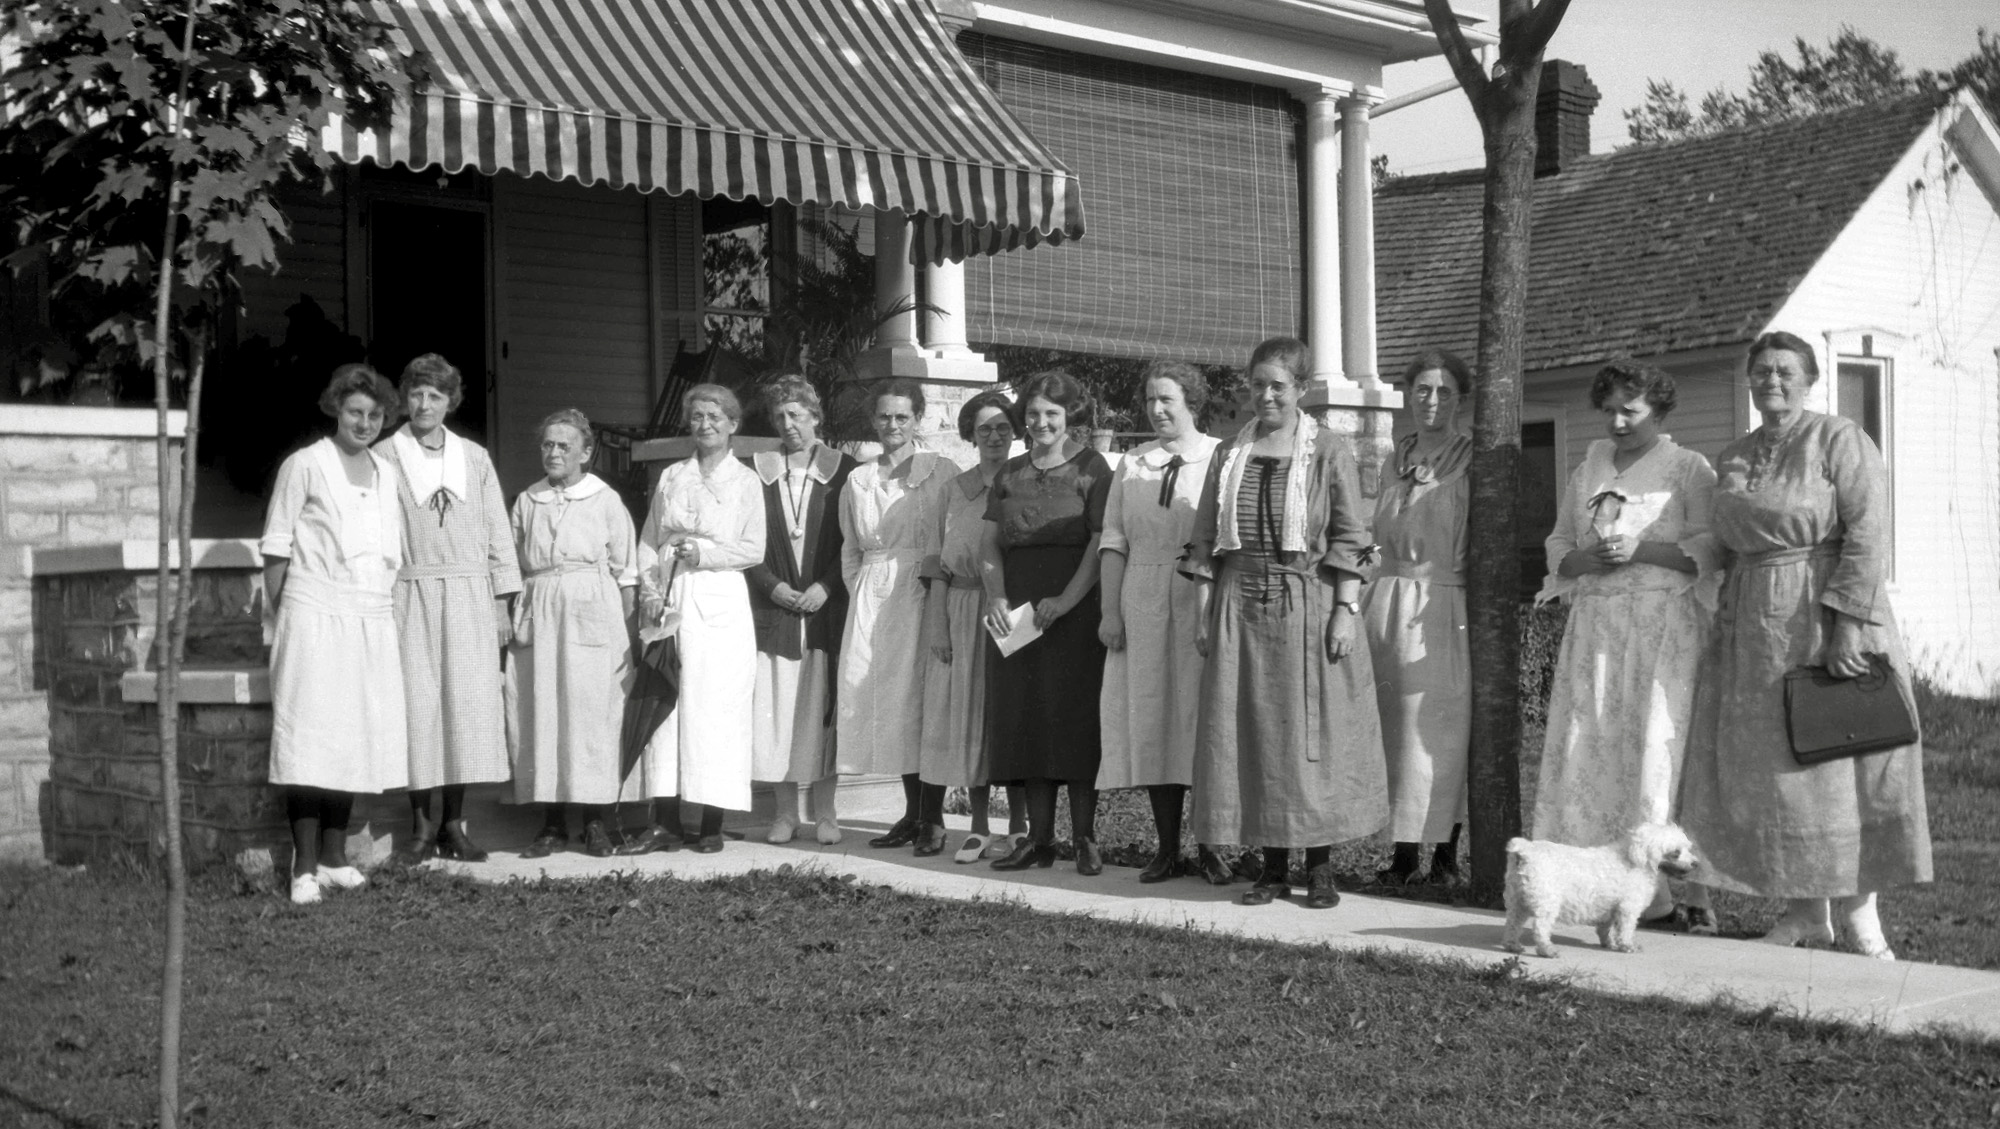 A bunch of ladies - including my great-grandmother, her daughter, at least one other relative, and who knows who else - gather outside the family home in East Waterford, Pennsylvania. View full size.